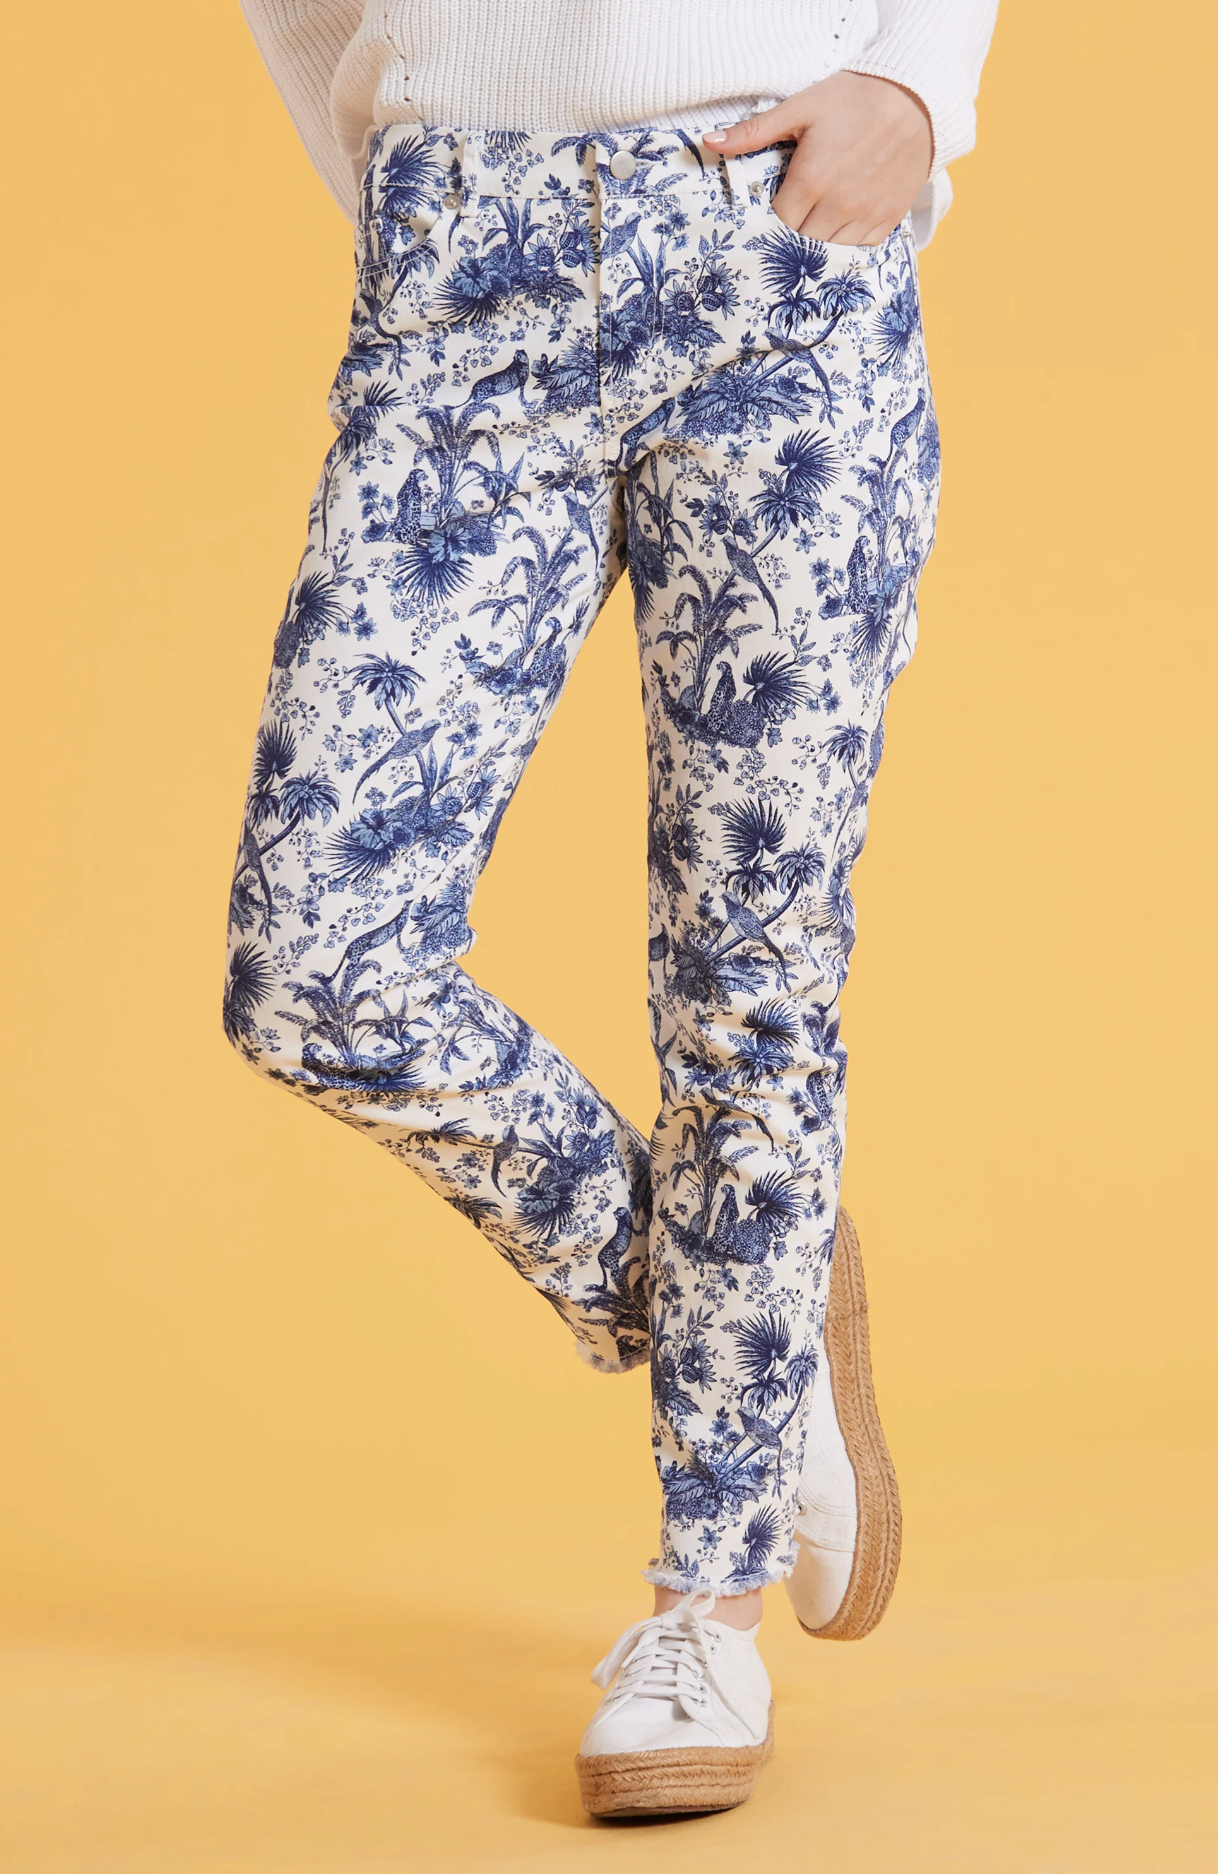 Twill Frayed Toile Jean - The French Shoppe